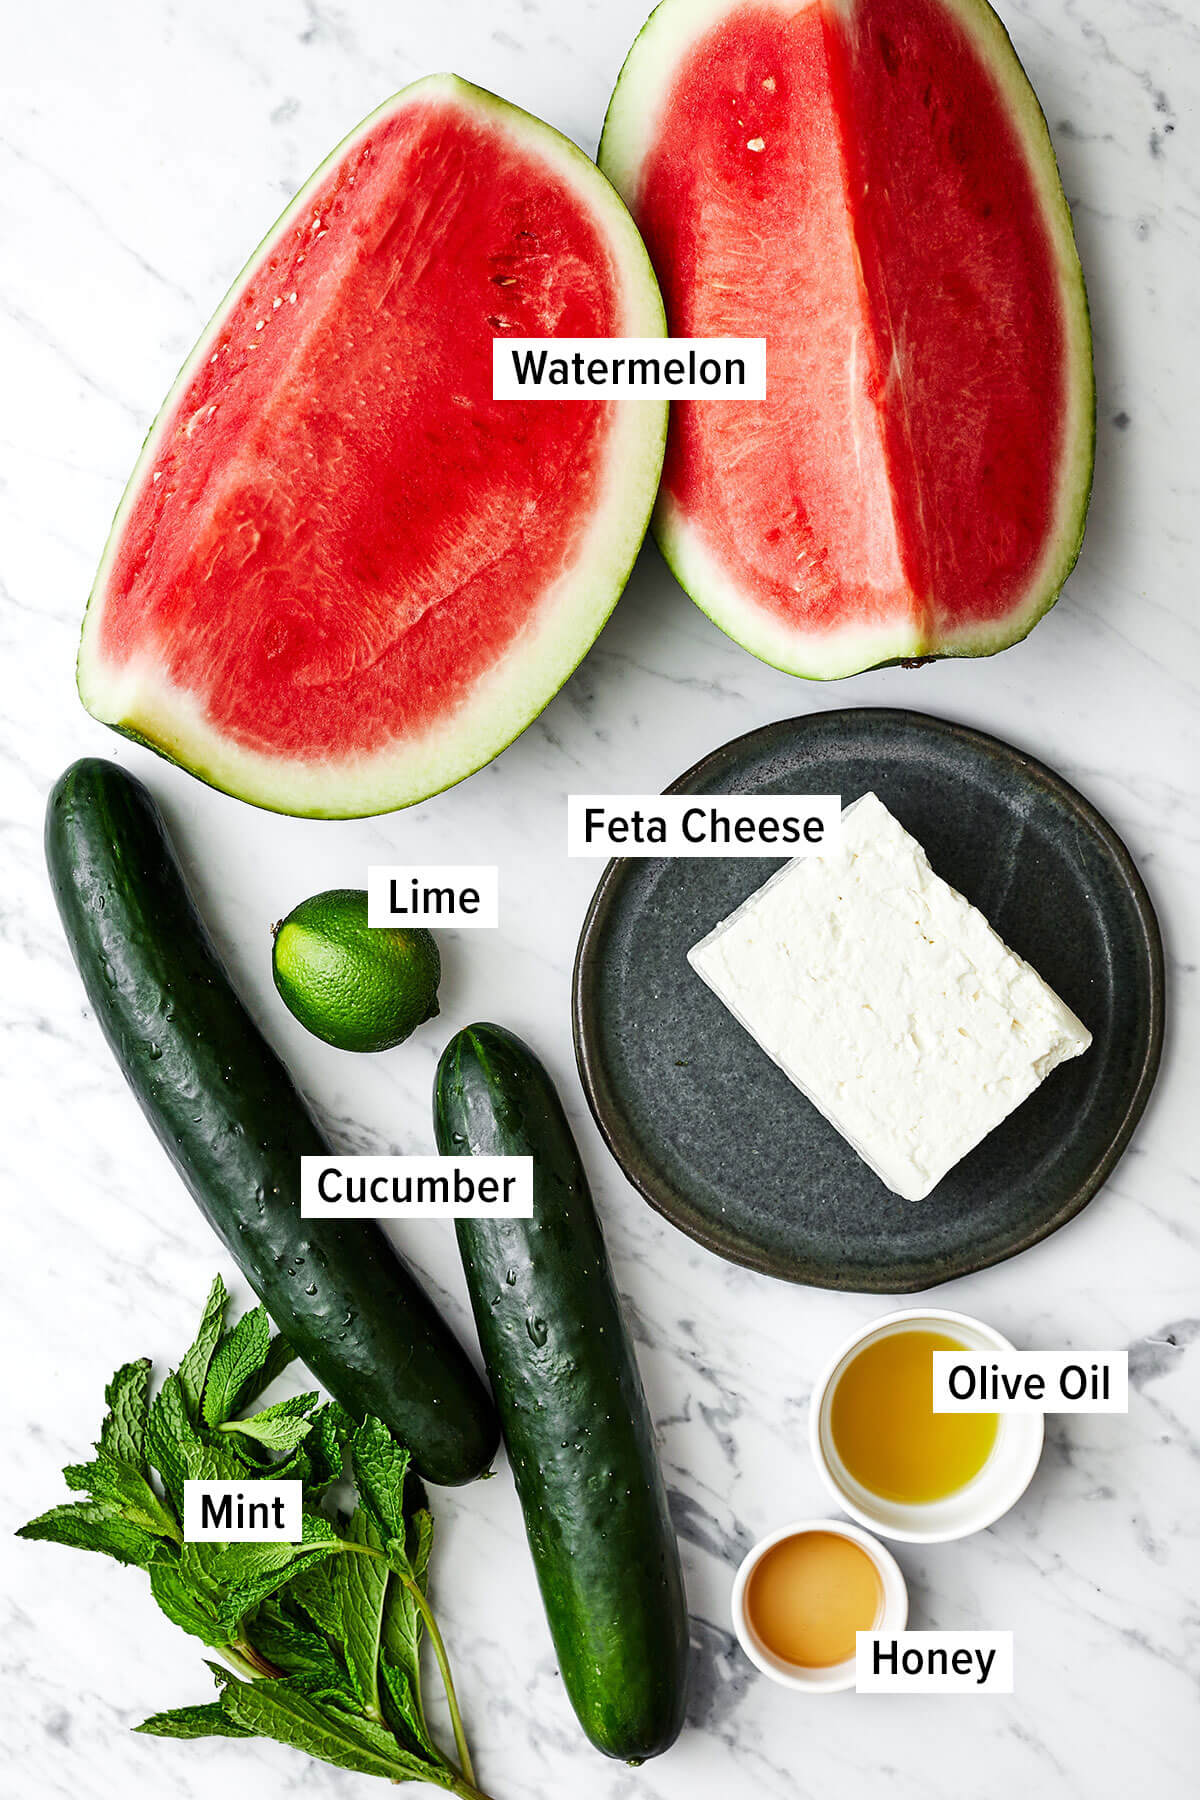 Ingredients for watermelon salad on a table